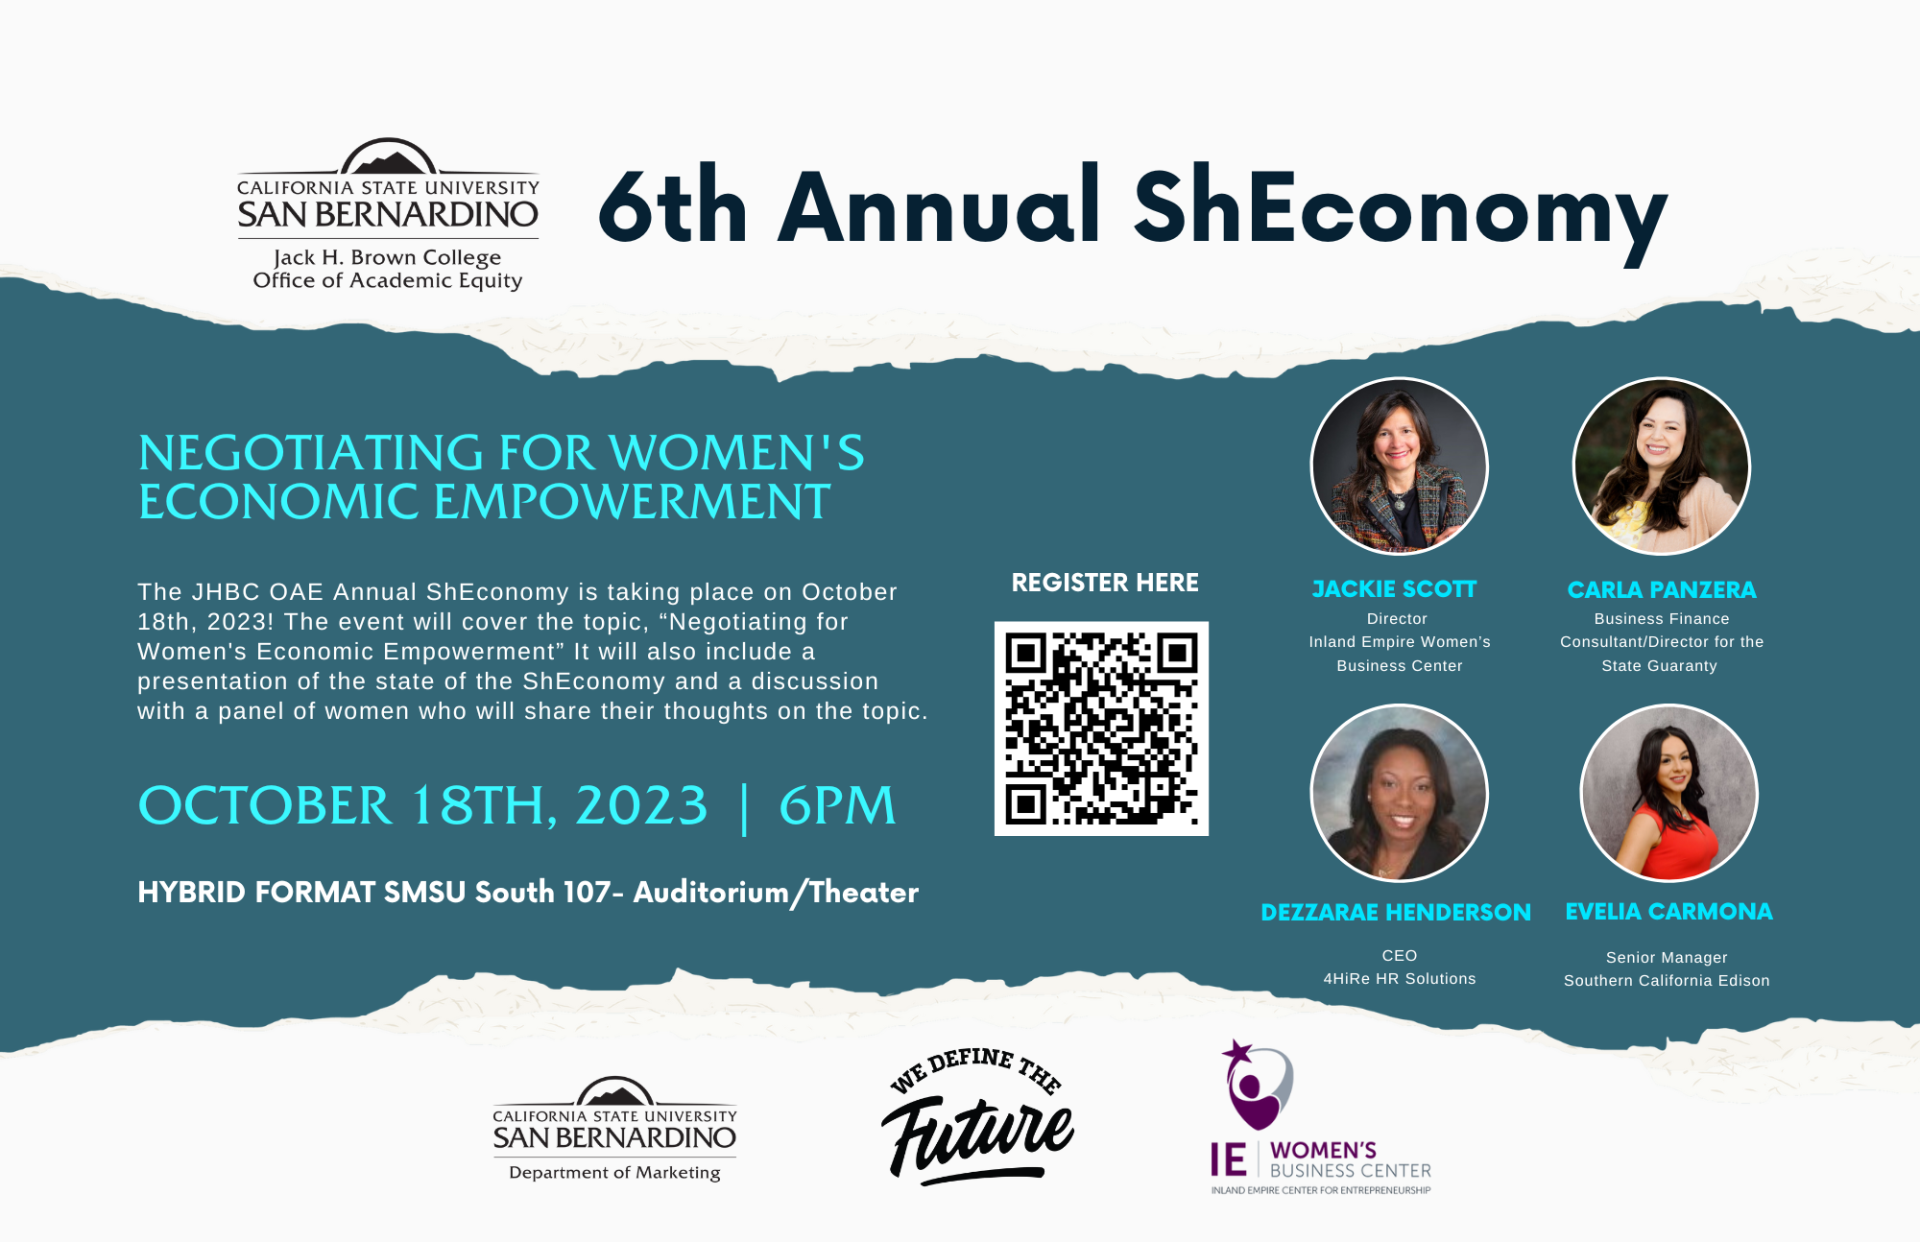 The 6th Annual ShEconomy will take place on October 18th, 2023